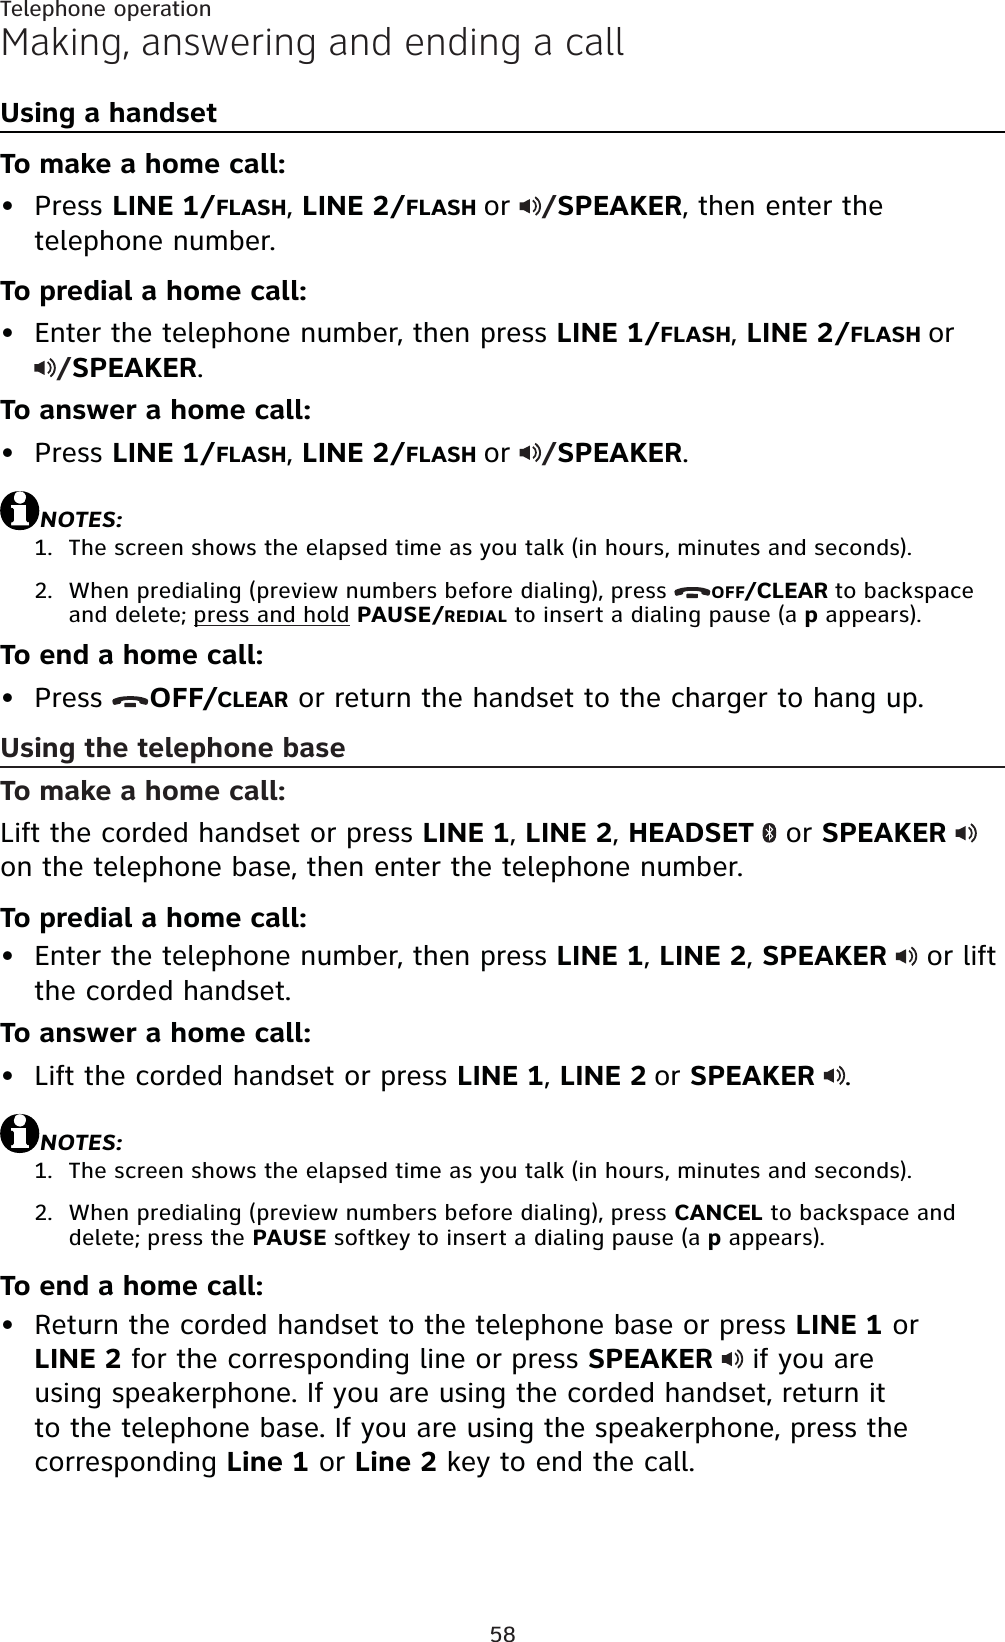 58Making, answering and ending a callUsing a handsetTo make a home call:Press LINE 1/FLASH,LINE 2/FLASH or /SPEAKER, then enter the telephone number.To predial a home call:Enter the telephone number, then press LINE 1/FLASH,LINE 2/FLASH or/SPEAKER.To answer a home call:Press LINE 1/FLASH,LINE 2/FLASH or /SPEAKER.NOTES:The screen shows the elapsed time as you talk (in hours, minutes and seconds).When predialing (preview numbers before dialing), press  OFF/CLEAR to backspace and delete; press and hold PAUSE/REDIAL to insert a dialing pause (a p appears).To end a home call:Press  OFF/CLEAR or return the handset to the charger to hang up.Using the telephone baseTo make a home call:Lift the corded handset or press LINE 1,LINE 2,HEADSET  or SPEAKERon the telephone base, then enter the telephone number.To predial a home call:Enter the telephone number, then press LINE 1,LINE 2,SPEAKER or lift the corded handset.To answer a home call:Lift the corded handset or press LINE 1,LINE 2 or SPEAKER .NOTES:The screen shows the elapsed time as you talk (in hours, minutes and seconds).When predialing (preview numbers before dialing), press CANCEL to backspace and delete; press the PAUSE softkey to insert a dialing pause (a p appears).To end a home call:Return the corded handset to the telephone base or press LINE 1 or LINE 2 for the corresponding line or press SPEAKER if you are using speakerphone. If you are using the corded handset, return it to the telephone base. If you are using the speakerphone, press the corresponding Line 1 or Line 2 key to end the call.•••1.2.•••1.2.•Telephone operation